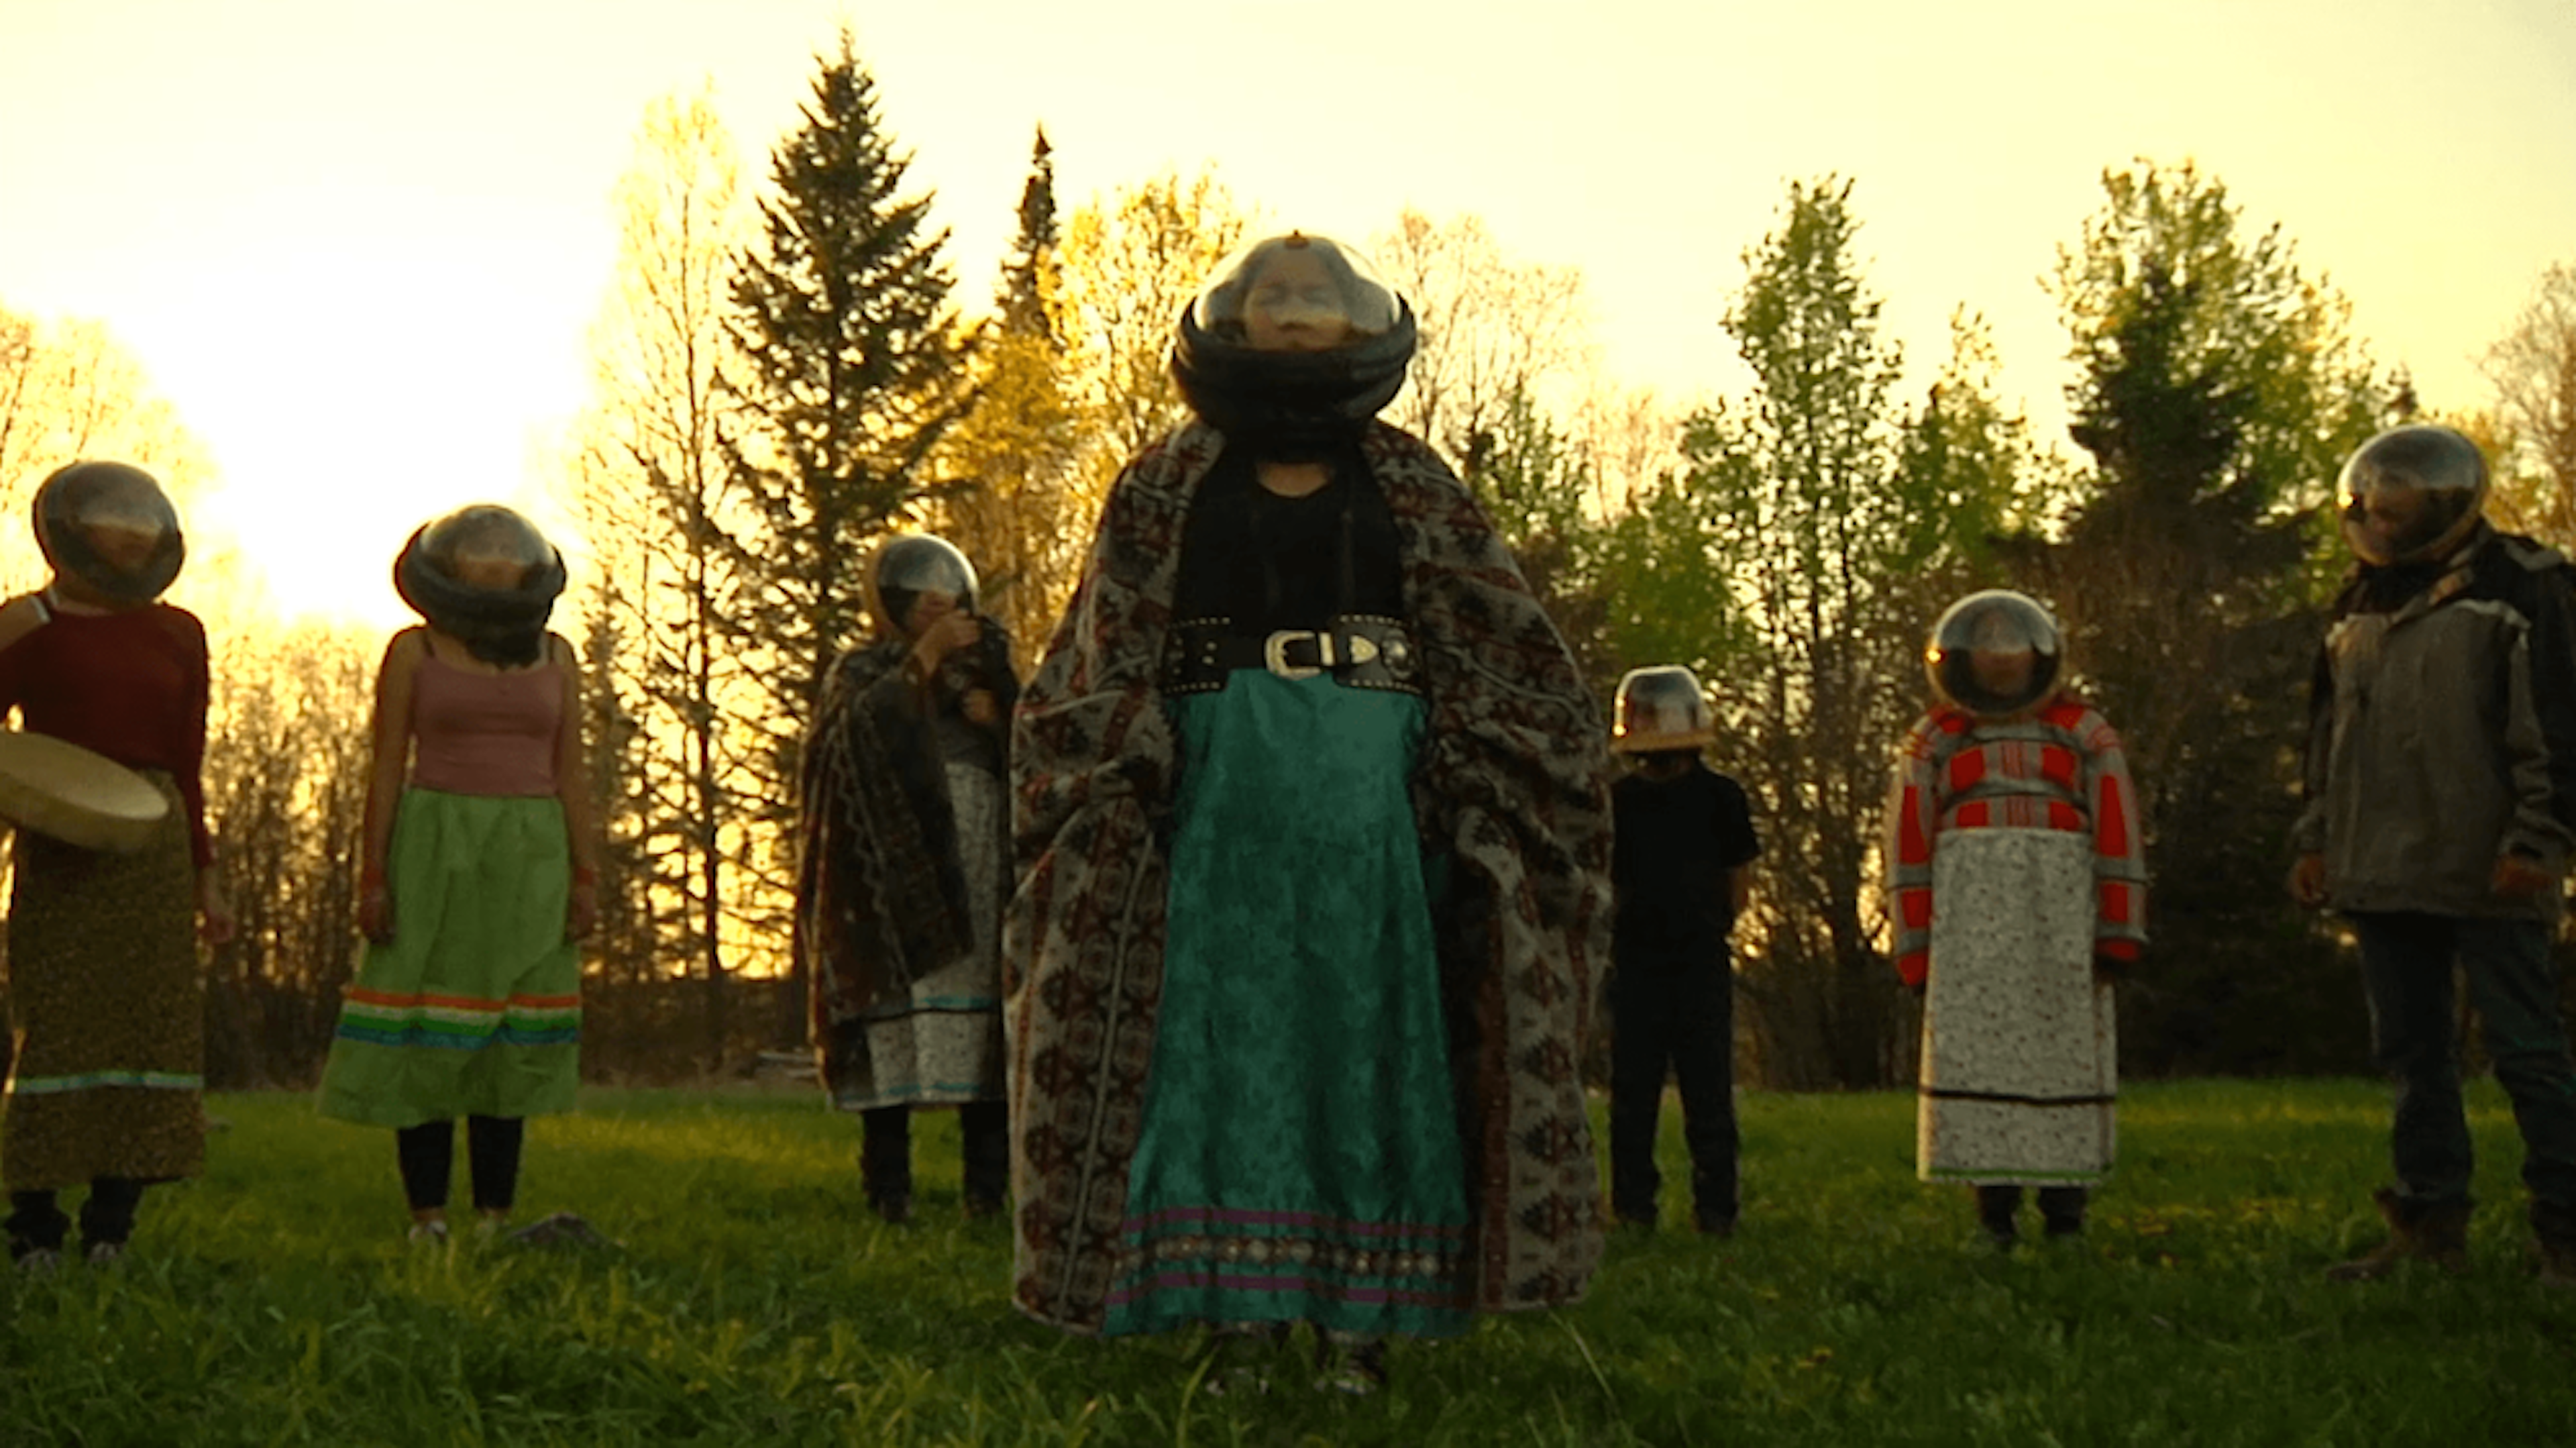 Six people stand in a semicircle with a seventh person in the middle. They are surrounded by trees and grass with the sun setting behind them.